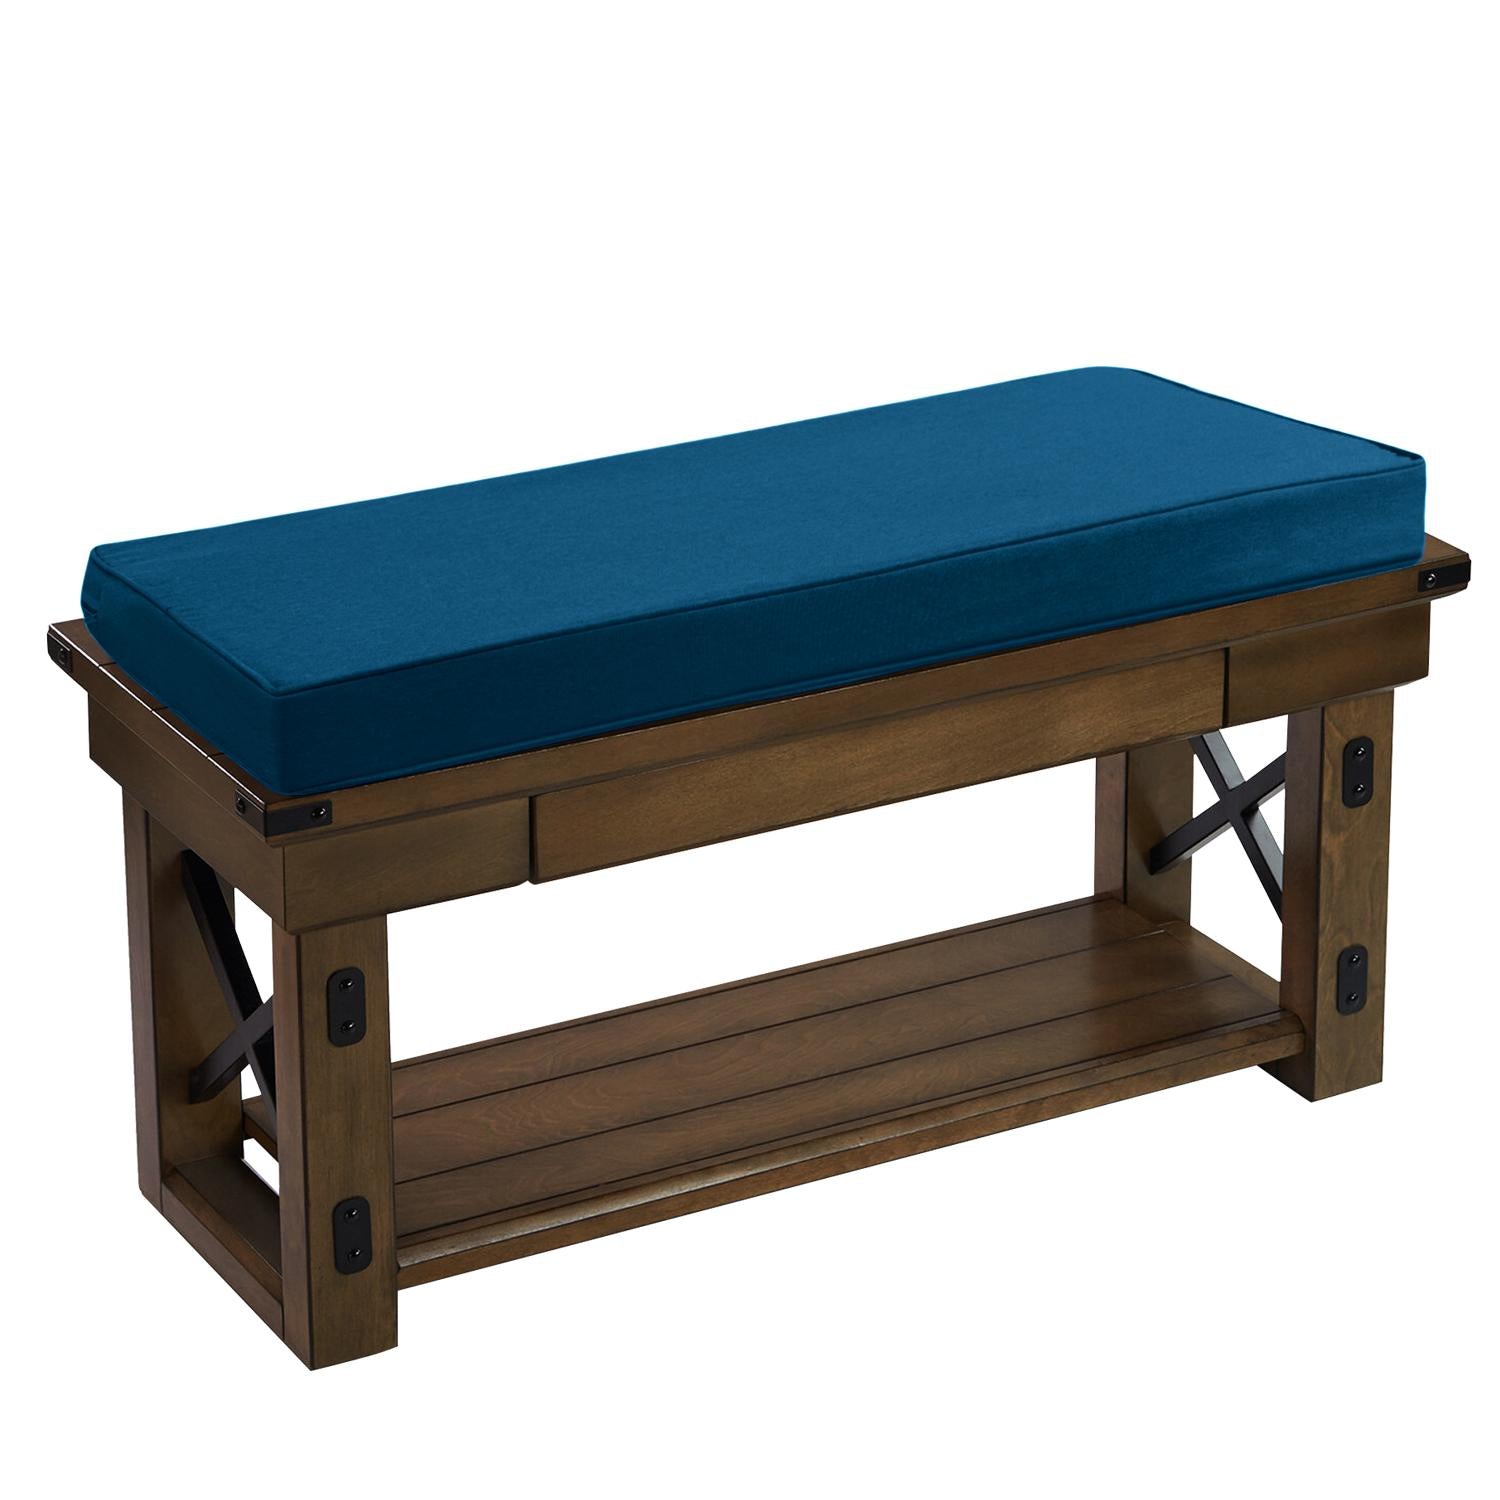 Bench Cushion Teal - Lifestyle